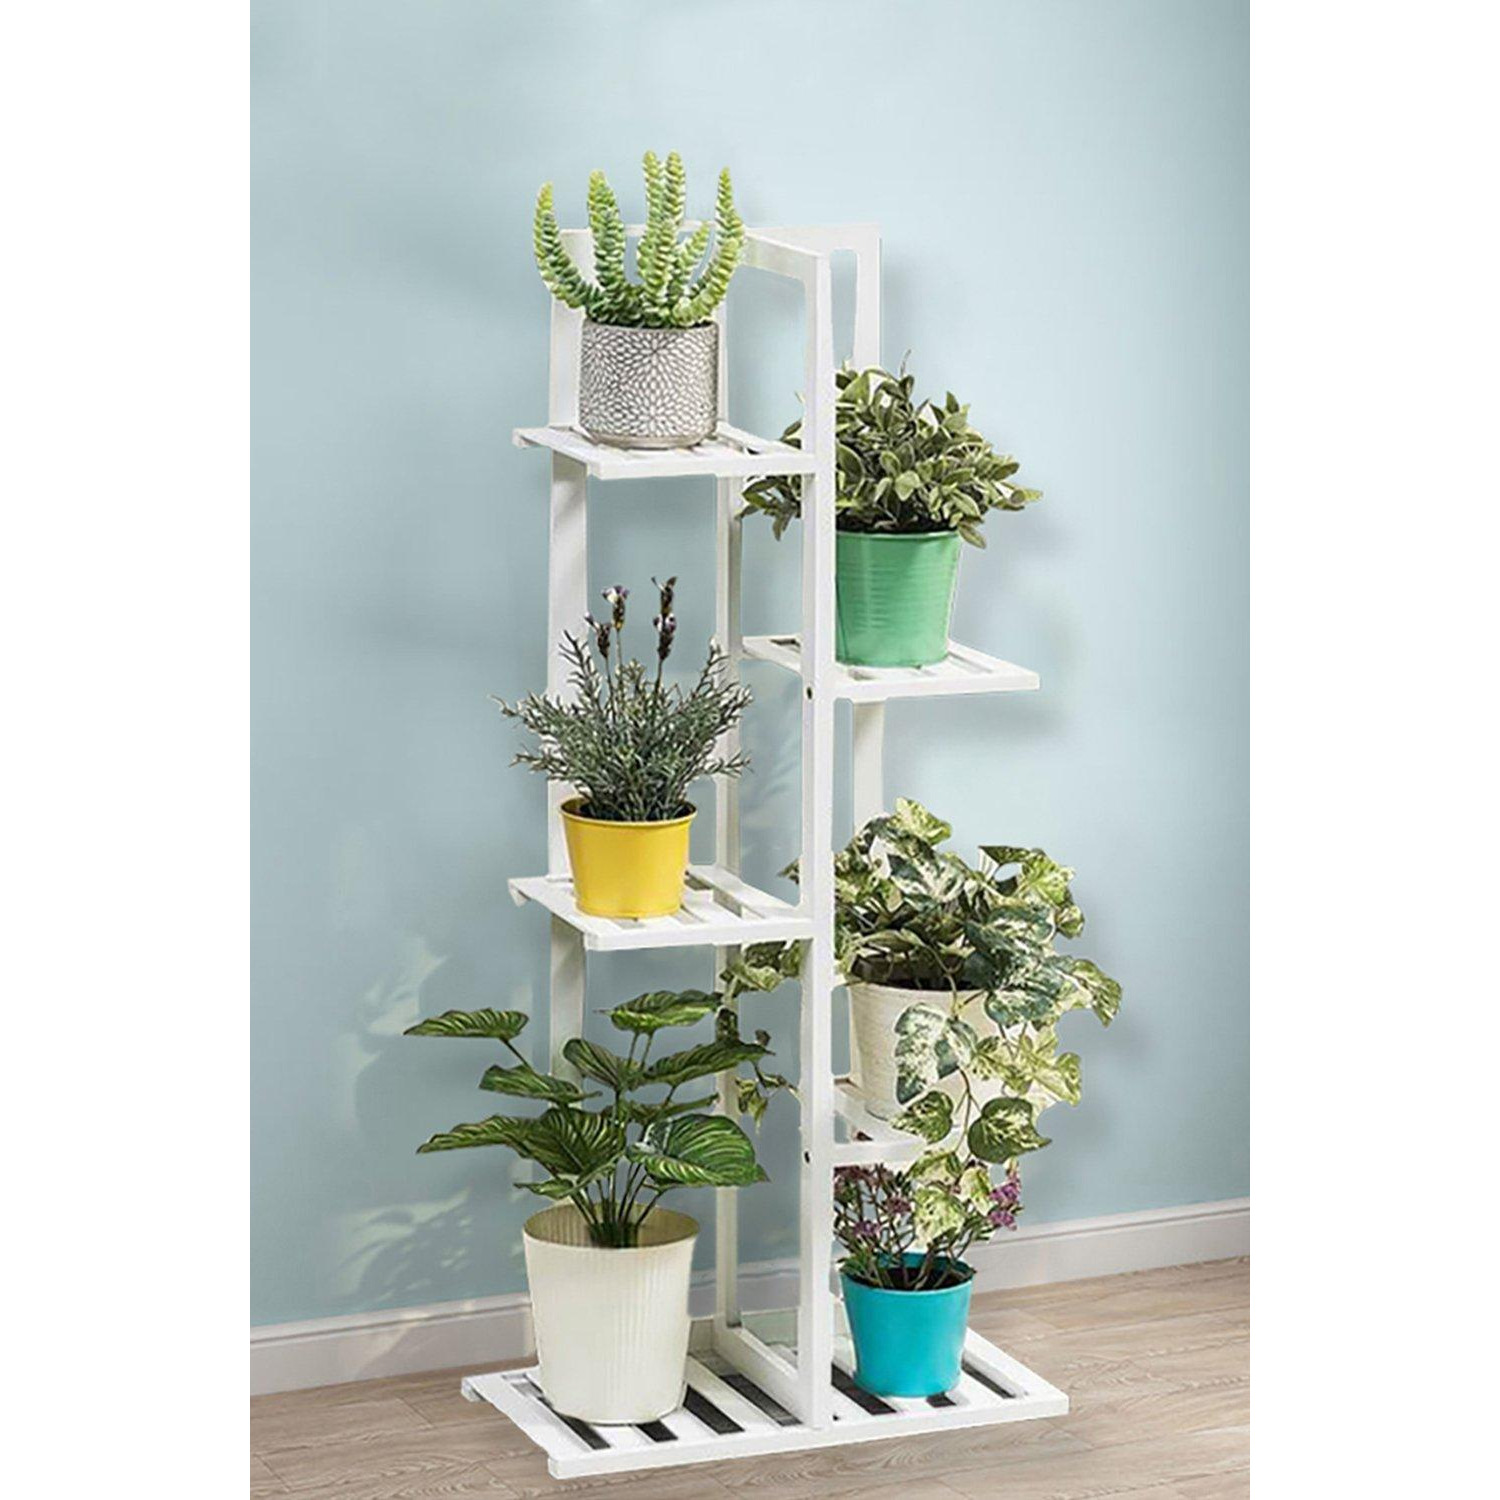 5 Tier Rustic Wooden Multi Tiered Watkin Plant Stand - image 1